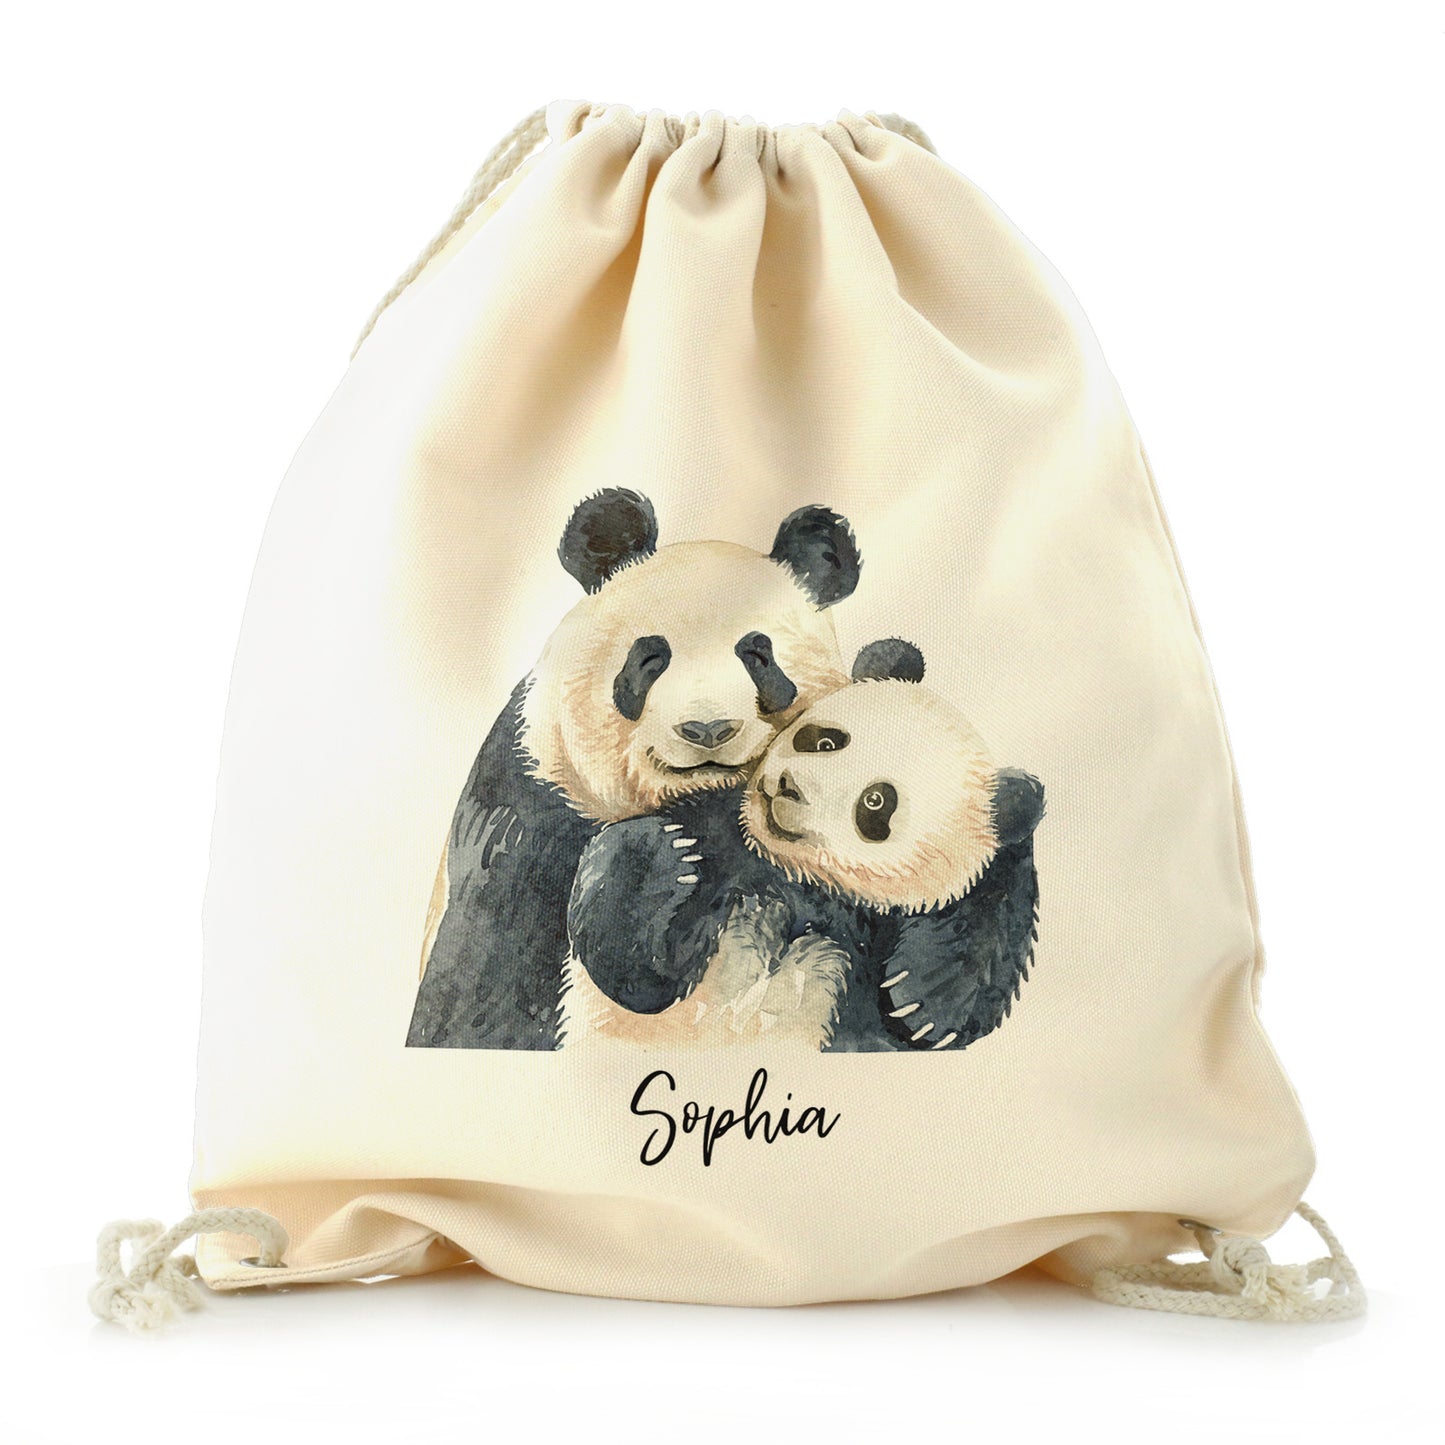 Personalised Canvas Drawstring Backpack with Welcoming Text and Embracing Mum and Baby Pandas